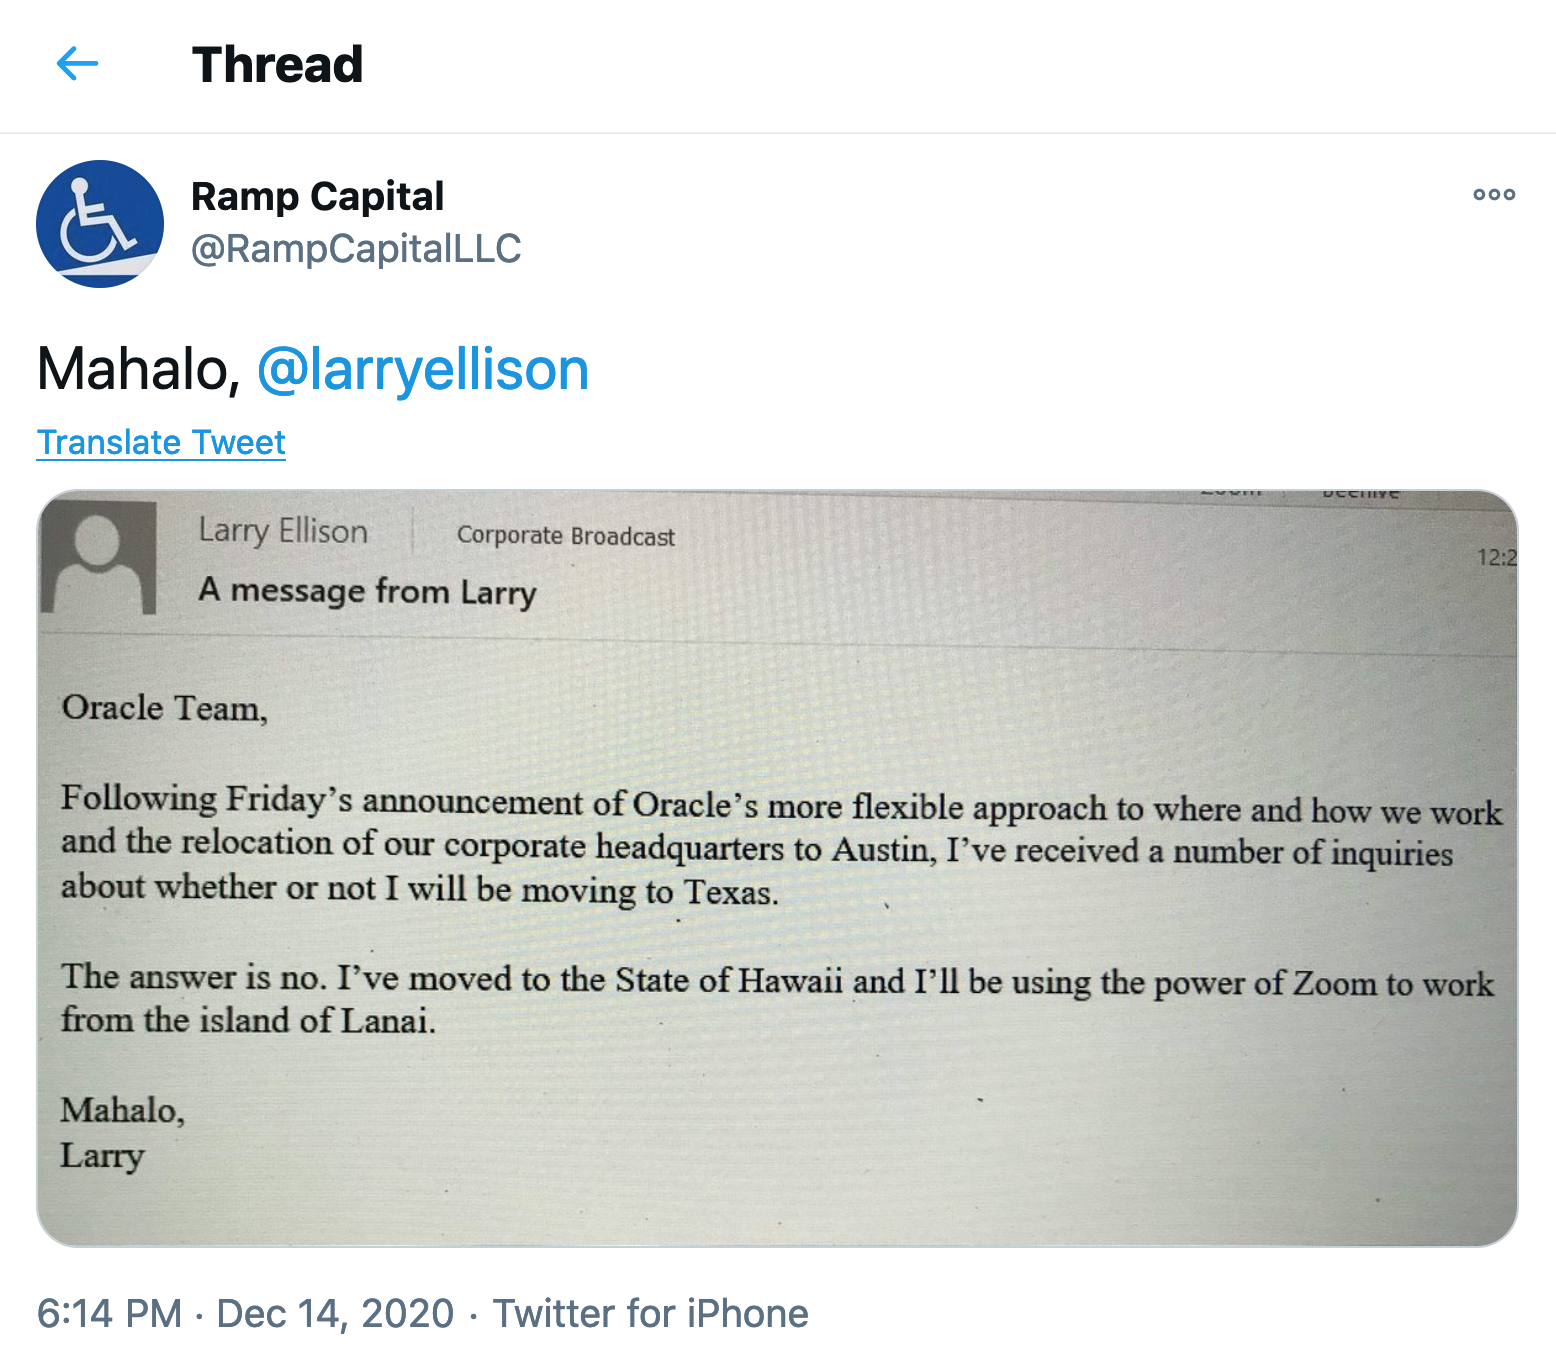 A screenshot of a tweet by Ramp Capital showing a photo of Oracle CEO Larry Ellison's email to staff.